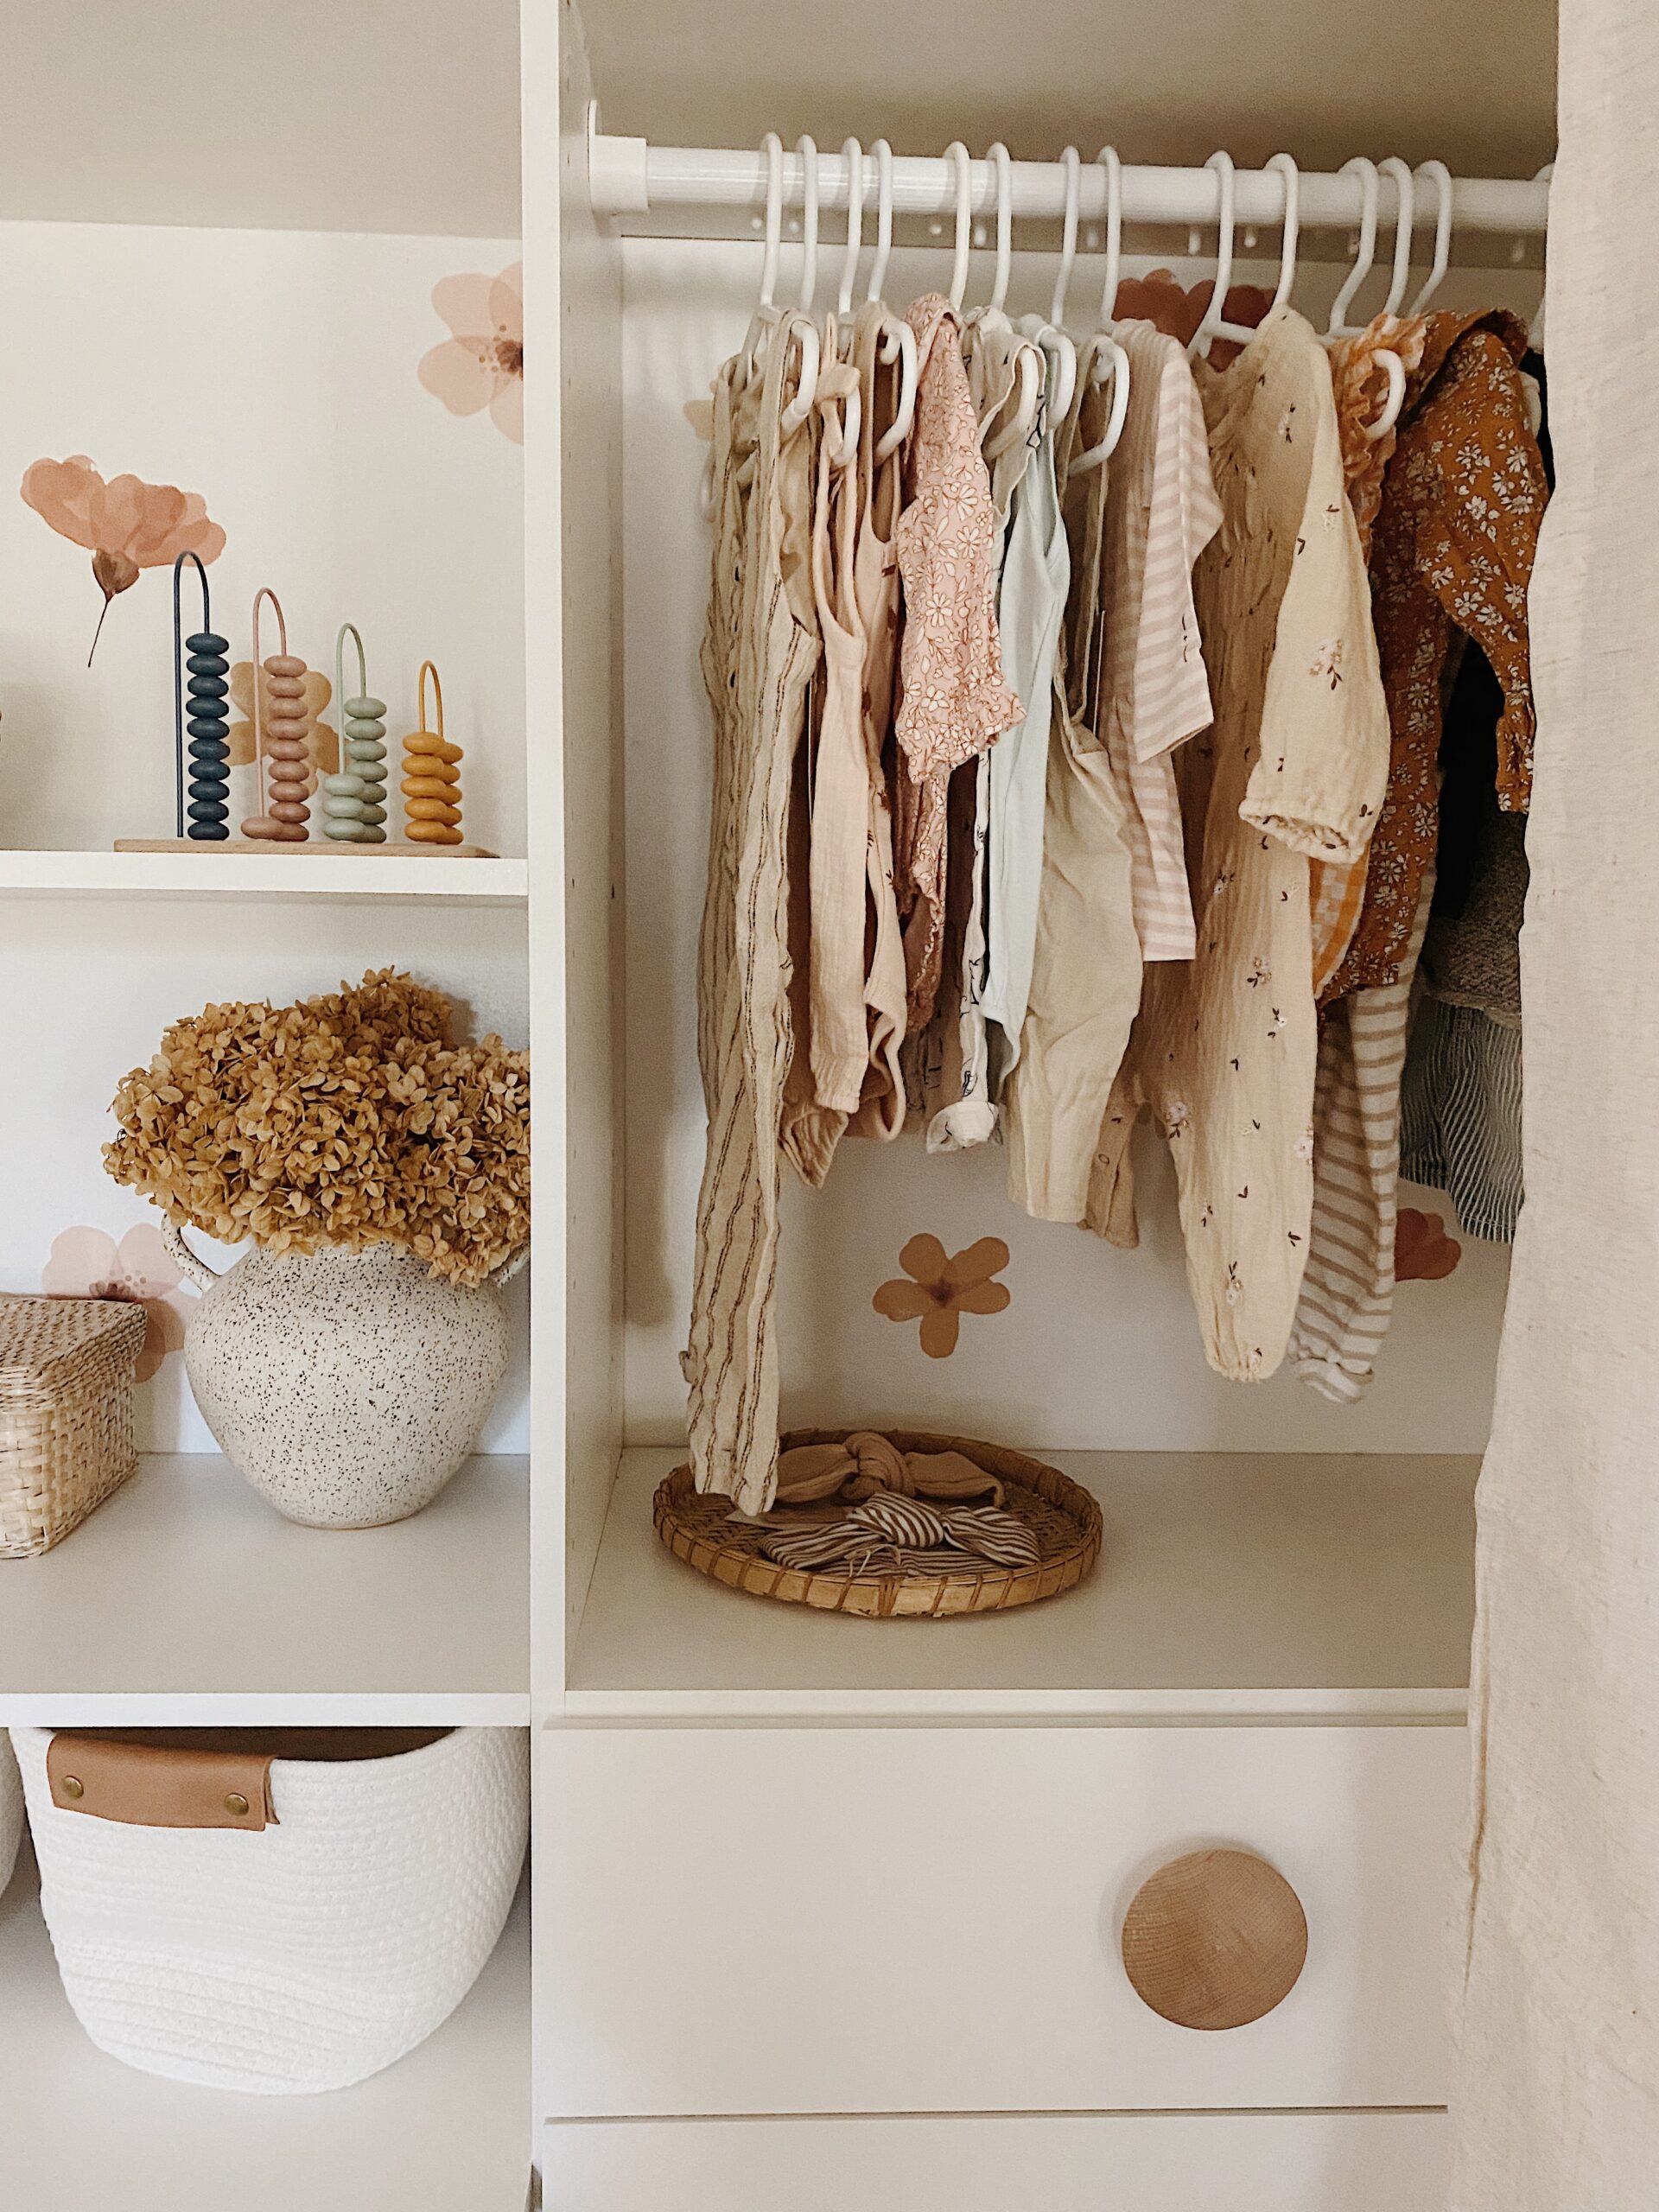 How to Organize a Baby's Closet & Other Nursery Organization Hacks